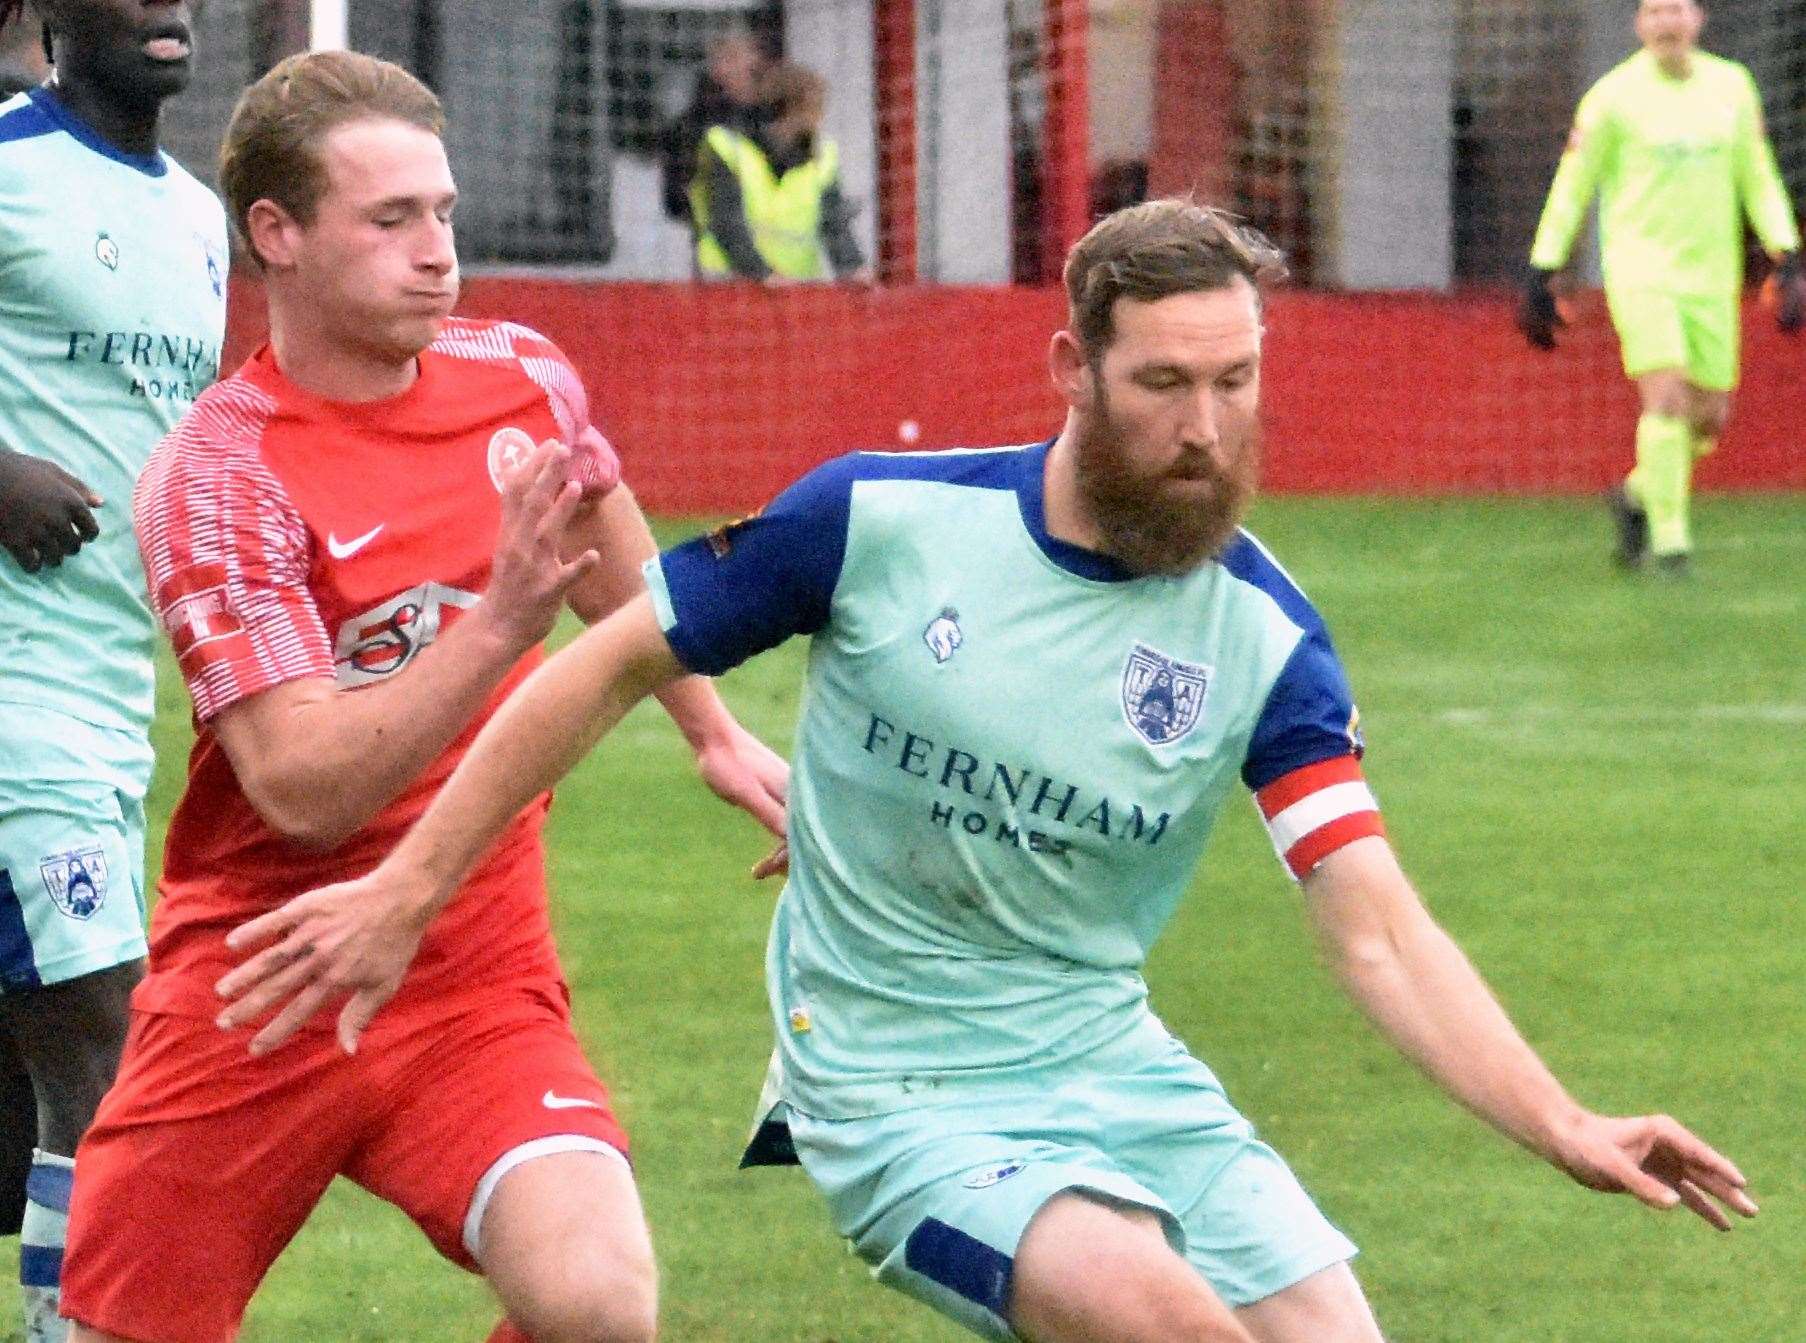 Tonbridge Angels captain Scott Wagstaff on the ball at Hythe. Picture: Randolph File